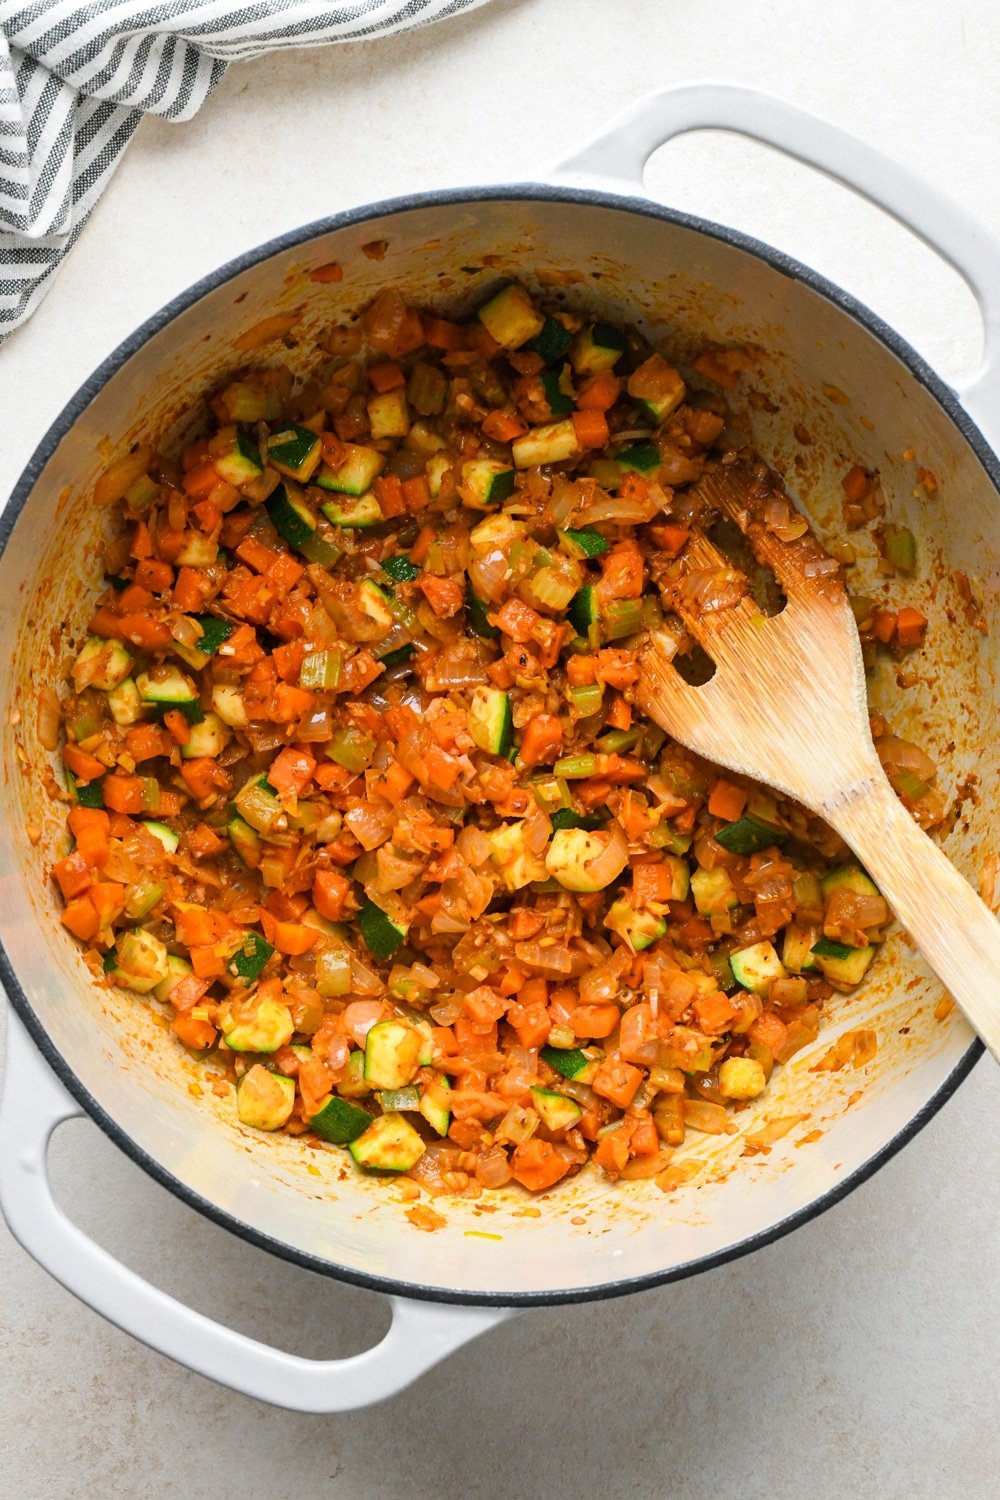 How to make Gluten Free Minestrone Soup: Diced zucchini, tomato paste, and dried spices added to the soup pot with sautéed vegetables, after stirring to combine and cooking until tomato paste has darkened.